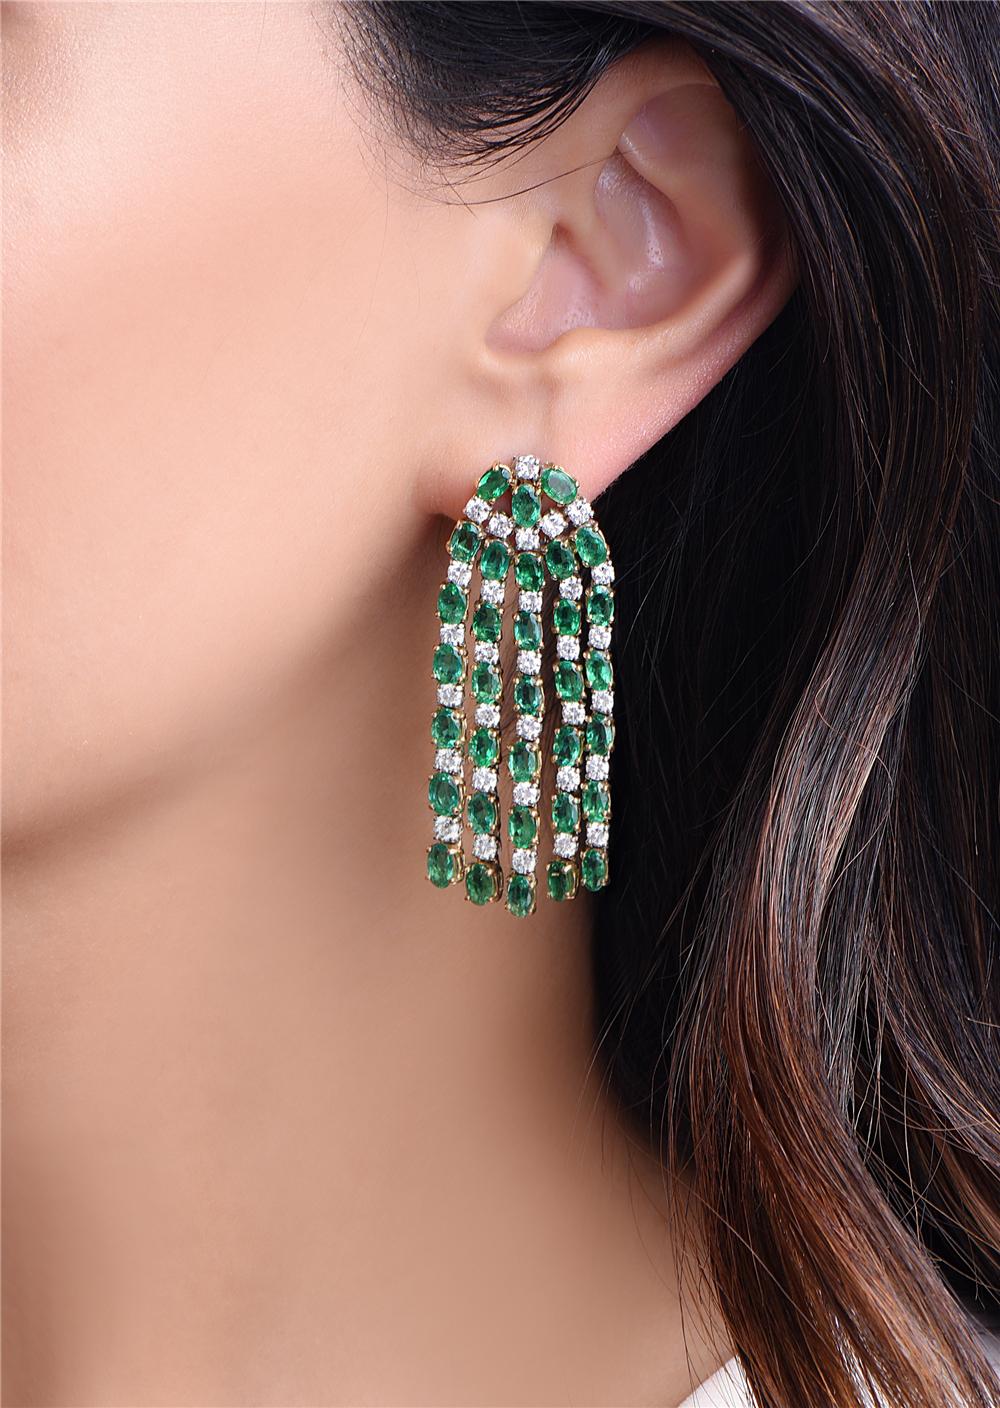 Round Cut Emerald and Diamond Dangle Chandelier Earrings Set in Yellow and White Gold